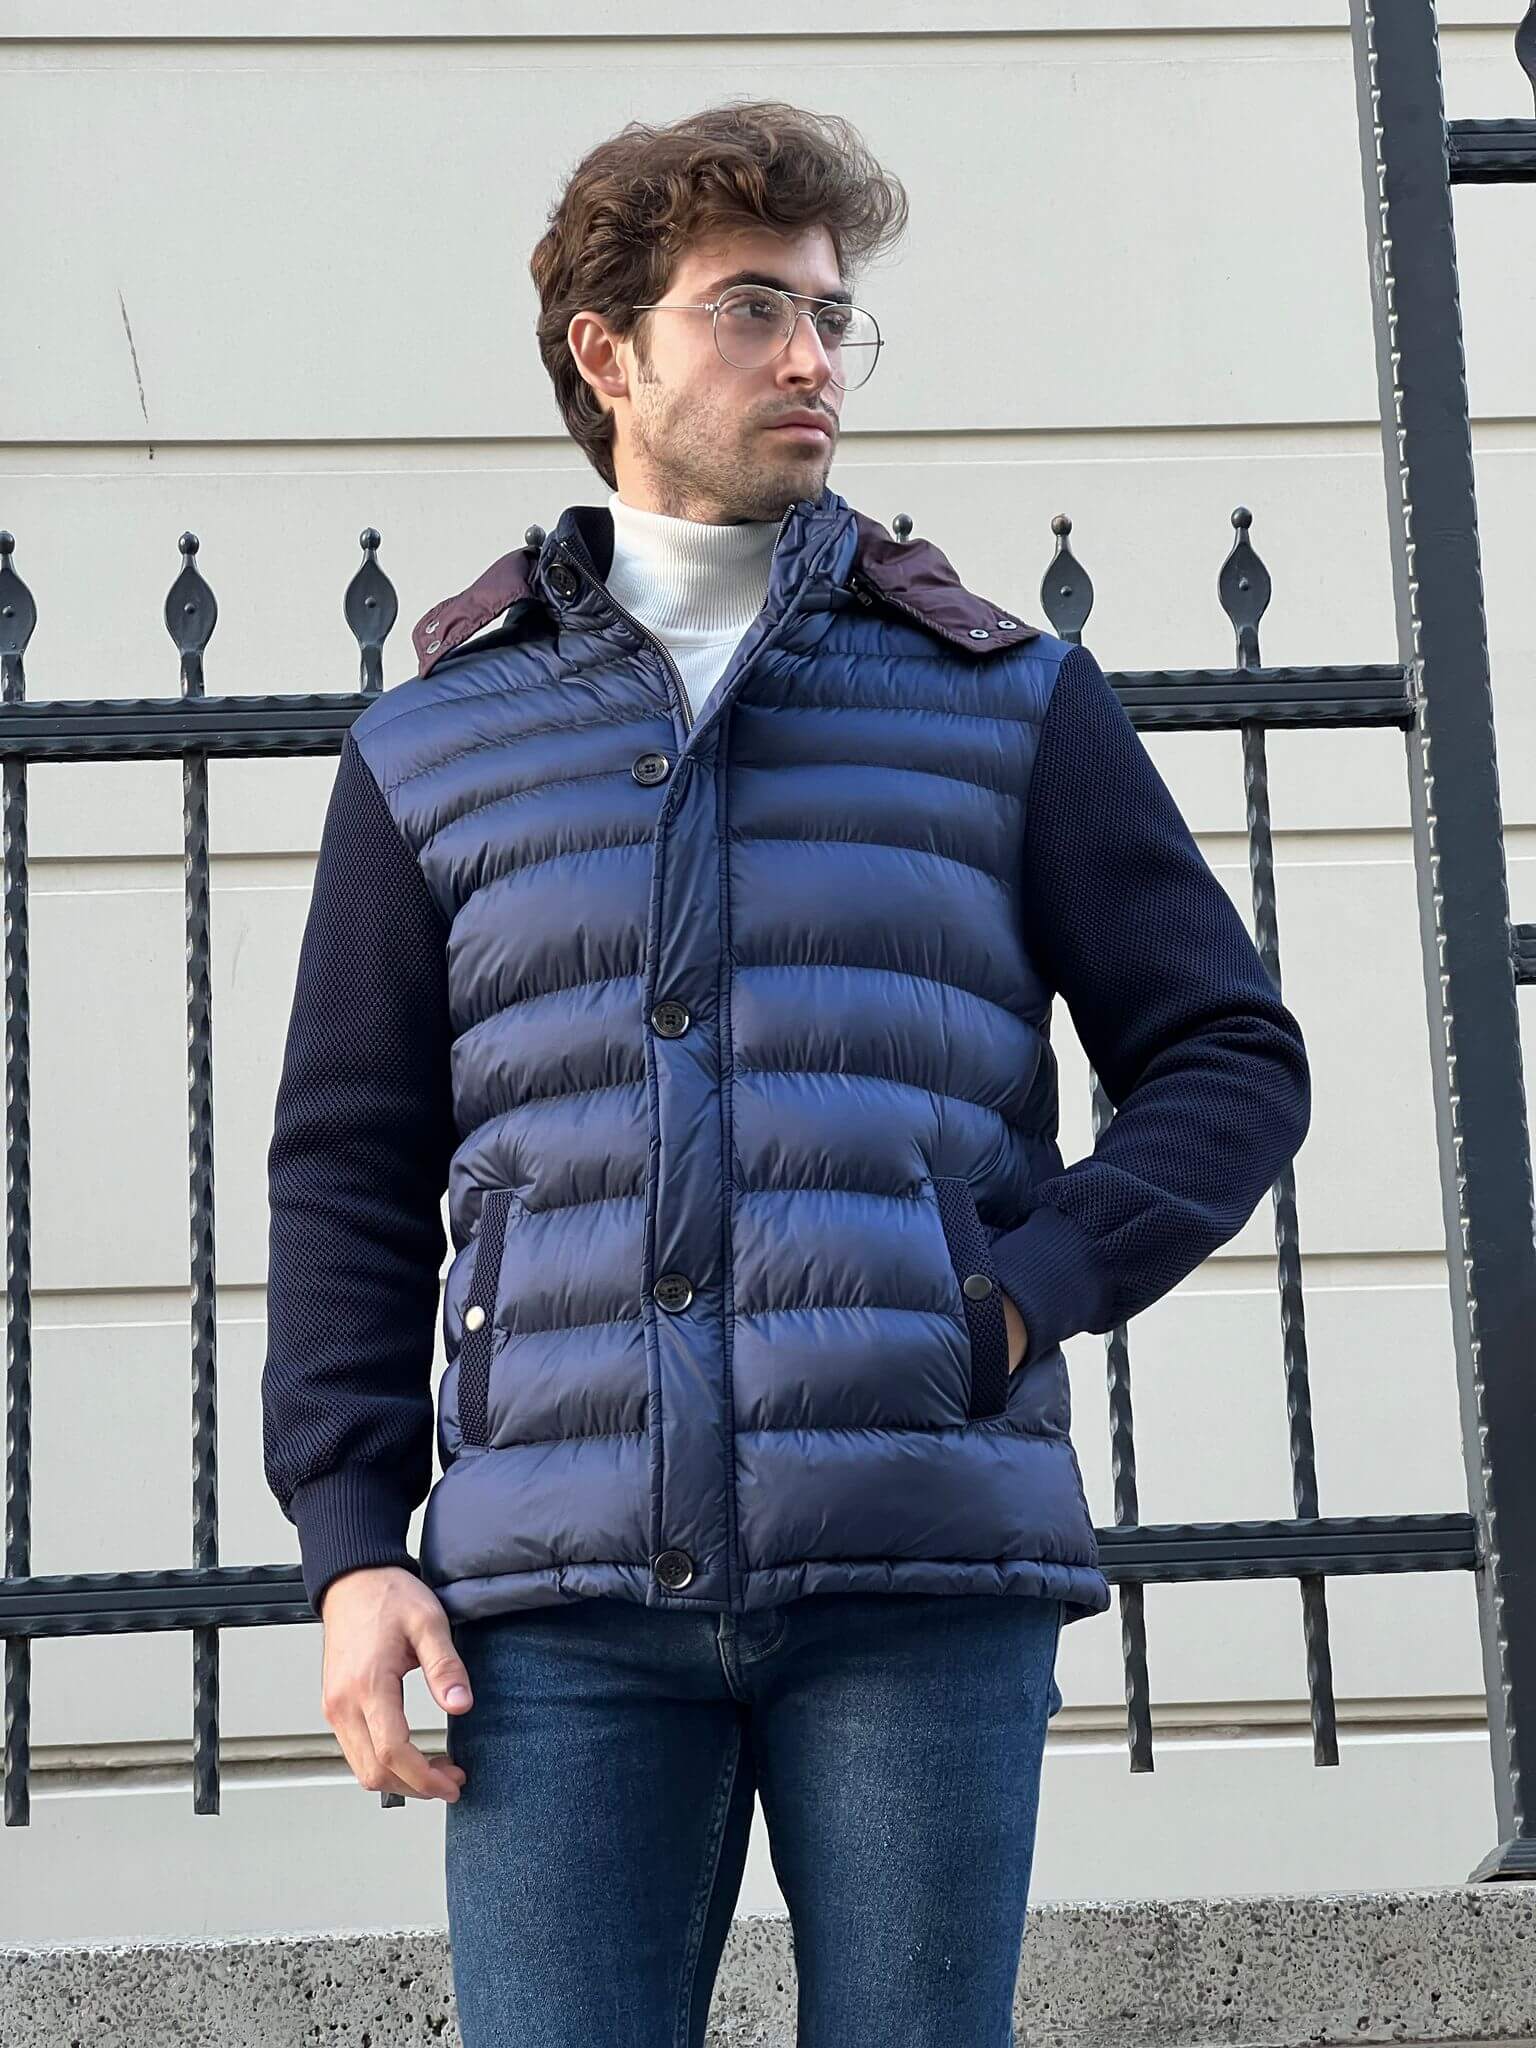 Modern and refined: Male fashion model in a textured navy blue knit coat, a timeless choice for the season.